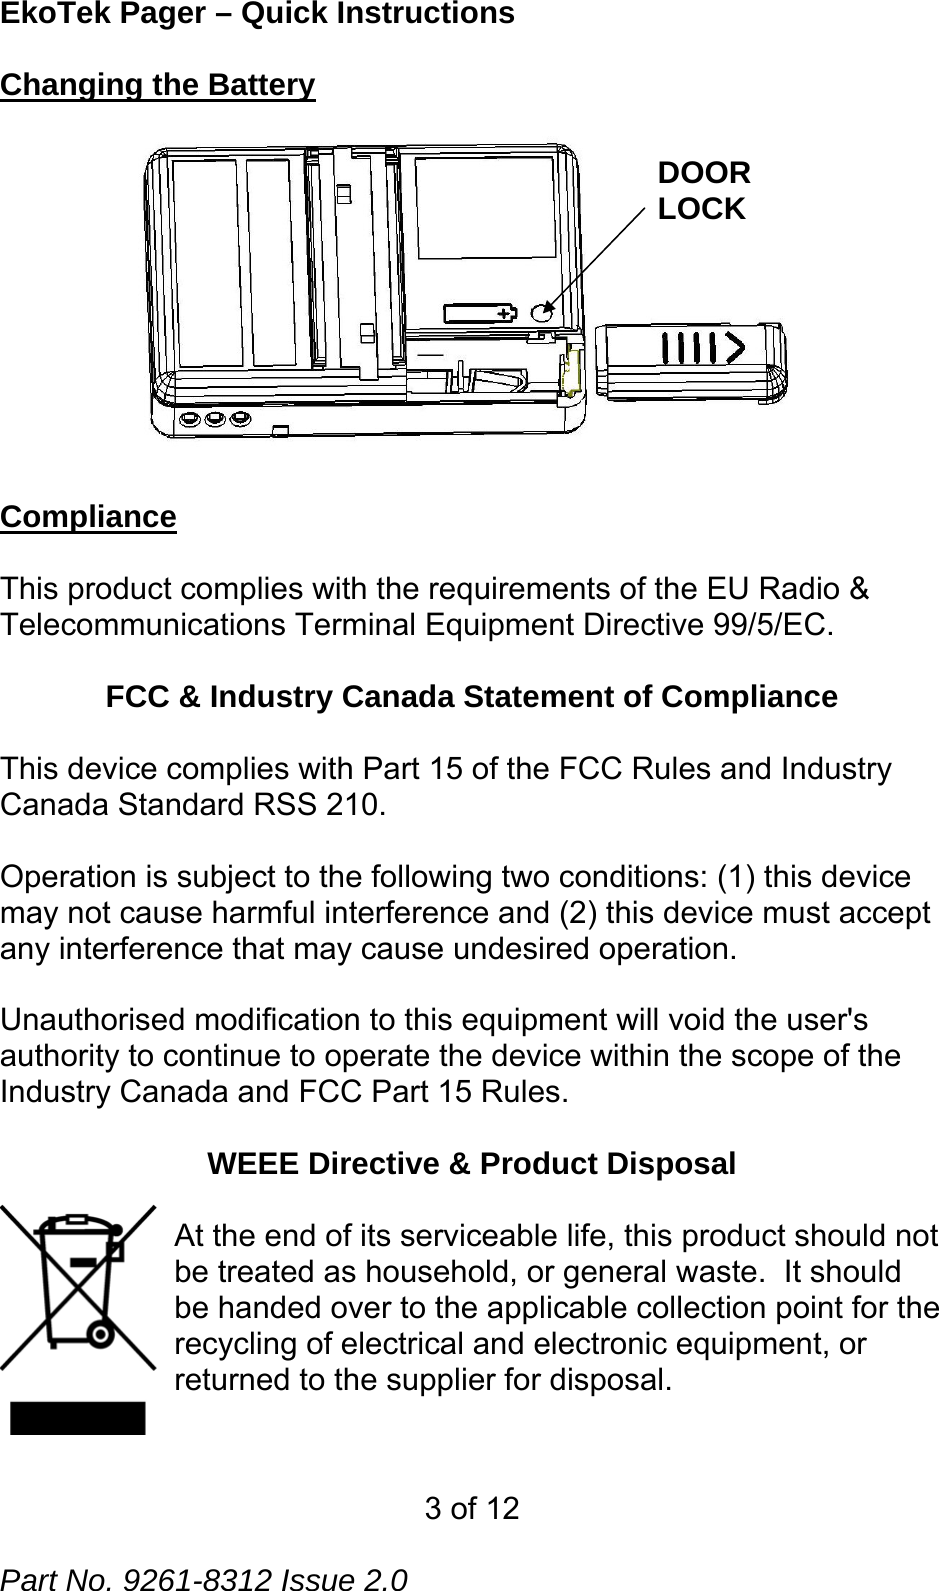 EkoTek Pager – Quick Instructions Changing the Battery DOOR LOCK  Compliance   This product complies with the requirements of the EU Radio &amp; Telecommunications Terminal Equipment Directive 99/5/EC.    FCC &amp; Industry Canada Statement of Compliance  This device complies with Part 15 of the FCC Rules and Industry Canada Standard RSS 210.  Operation is subject to the following two conditions: (1) this device may not cause harmful interference and (2) this device must accept any interference that may cause undesired operation.  Unauthorised modification to this equipment will void the user&apos;s authority to continue to operate the device within the scope of the Industry Canada and FCC Part 15 Rules.  WEEE Directive &amp; Product Disposal  At the end of its serviceable life, this product should not be treated as household, or general waste.  It should be handed over to the applicable collection point for the recycling of electrical and electronic equipment, or returned to the supplier for disposal.   3 of 12  Part No. 9261-8312 Issue 2.0 